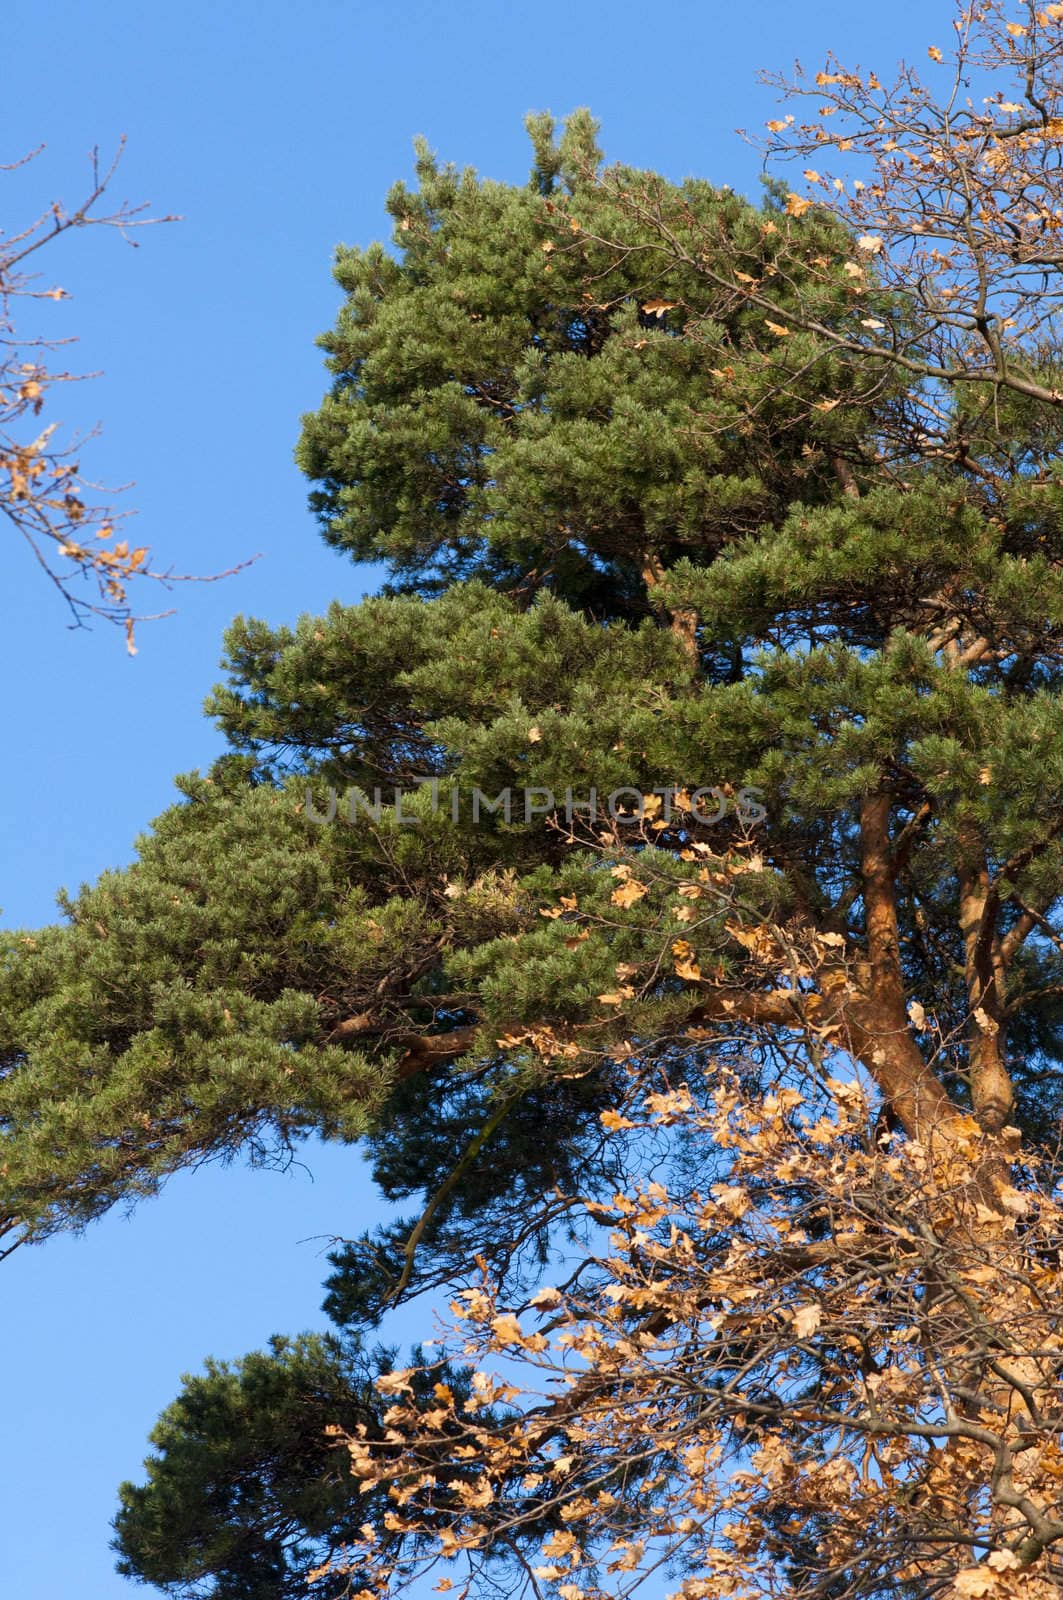 High resolution image. Pine against the blue sky. Autumn forest.